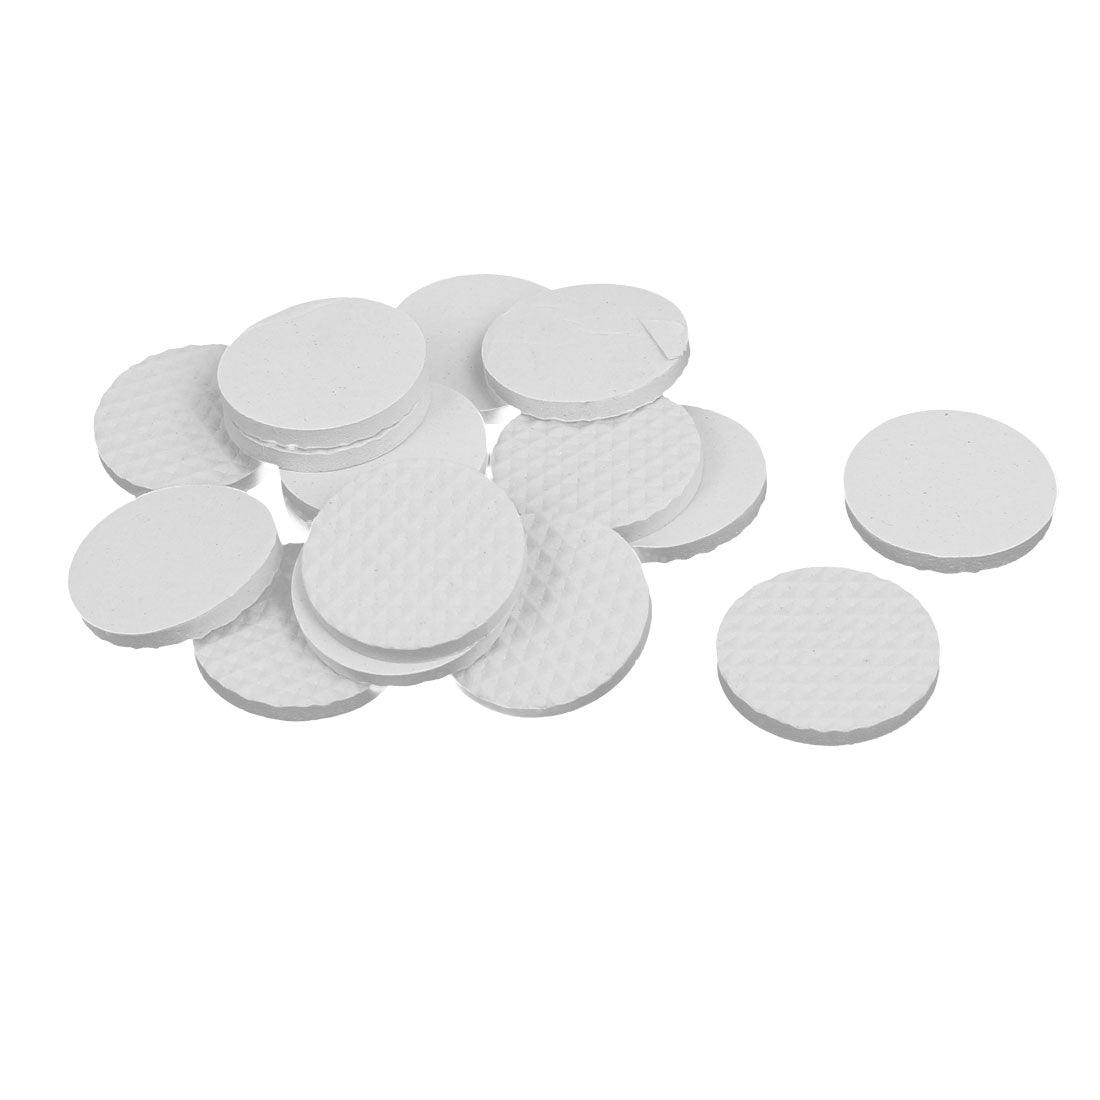 uxcell Uxcell 30mm Dia Rubber Self Adhesive Anti-Skid Furniture Protection Pads White 16pcs